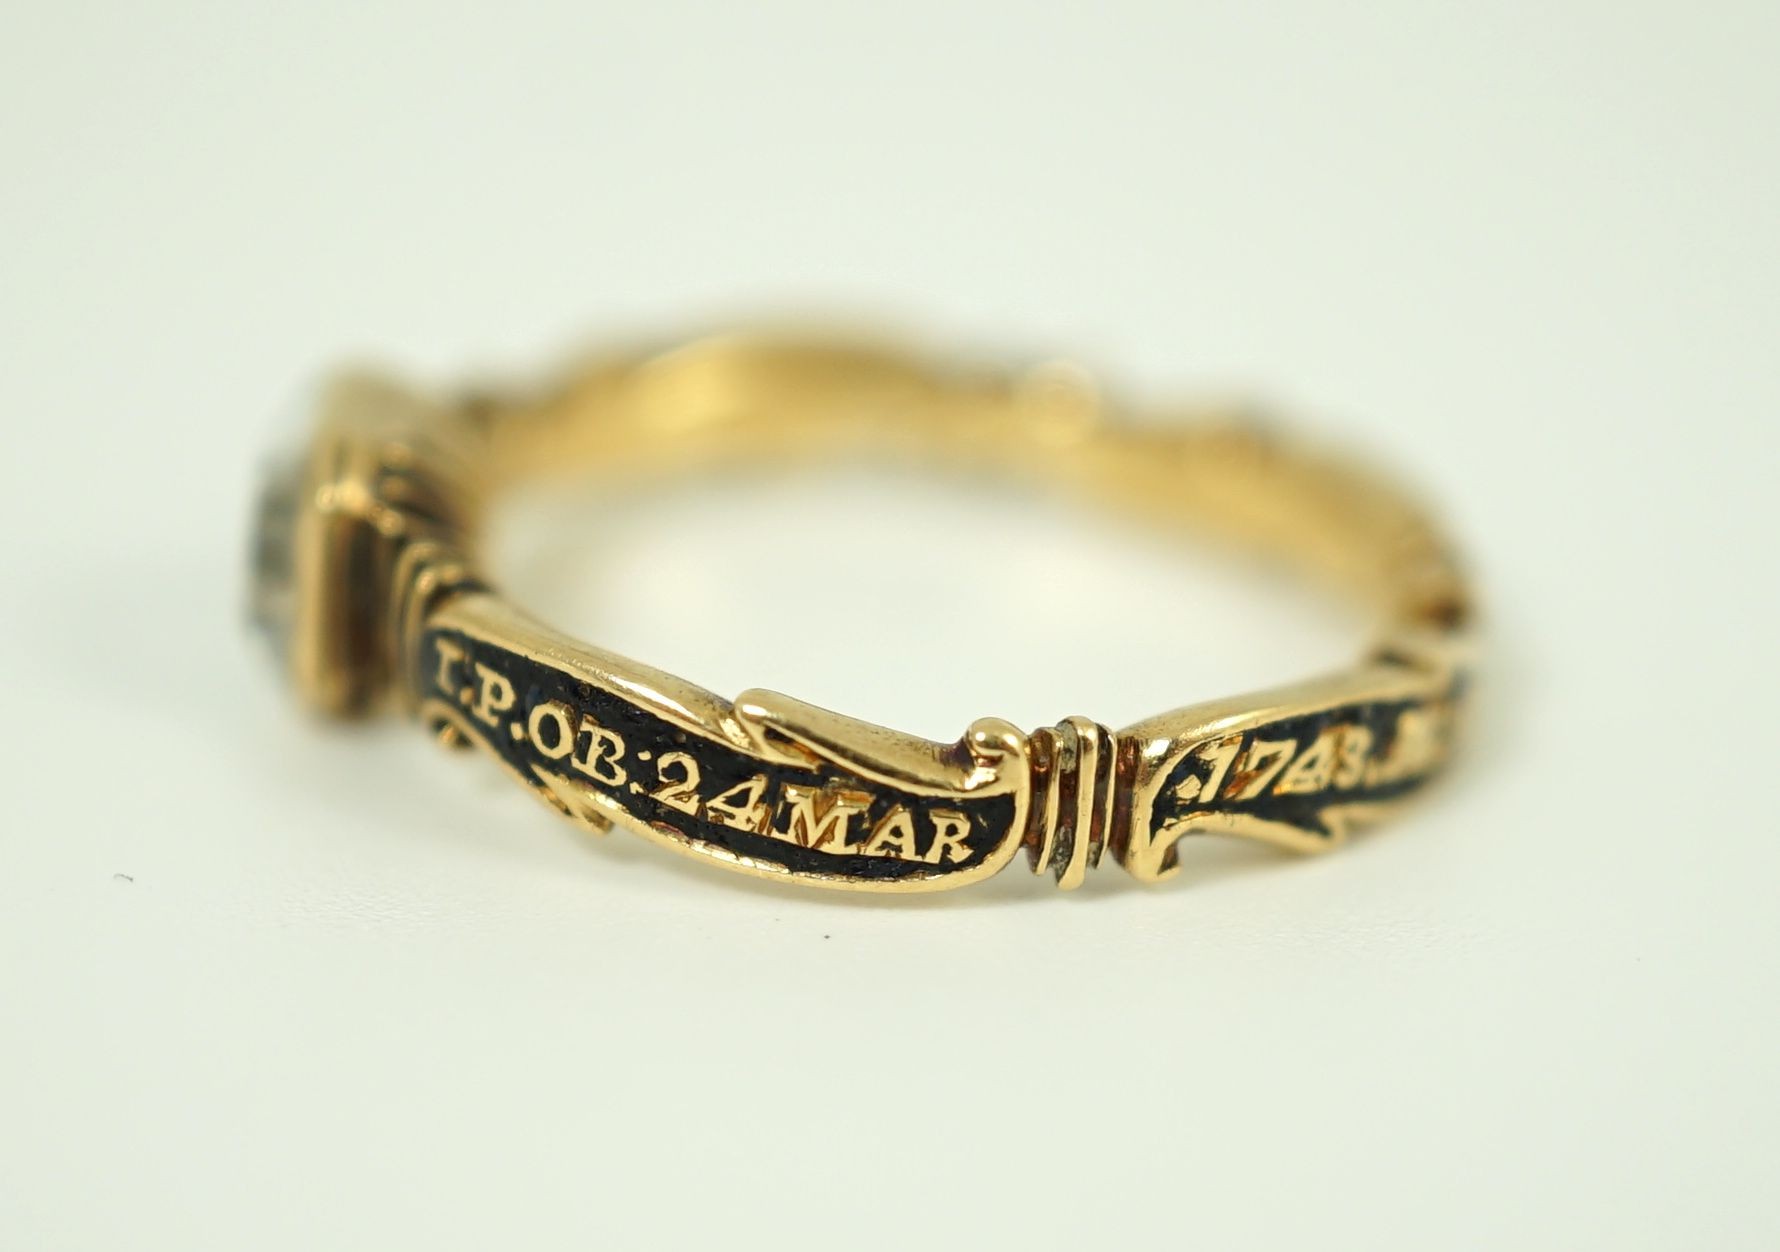 A George II gold, black enamel and rock crystal set mourning ring